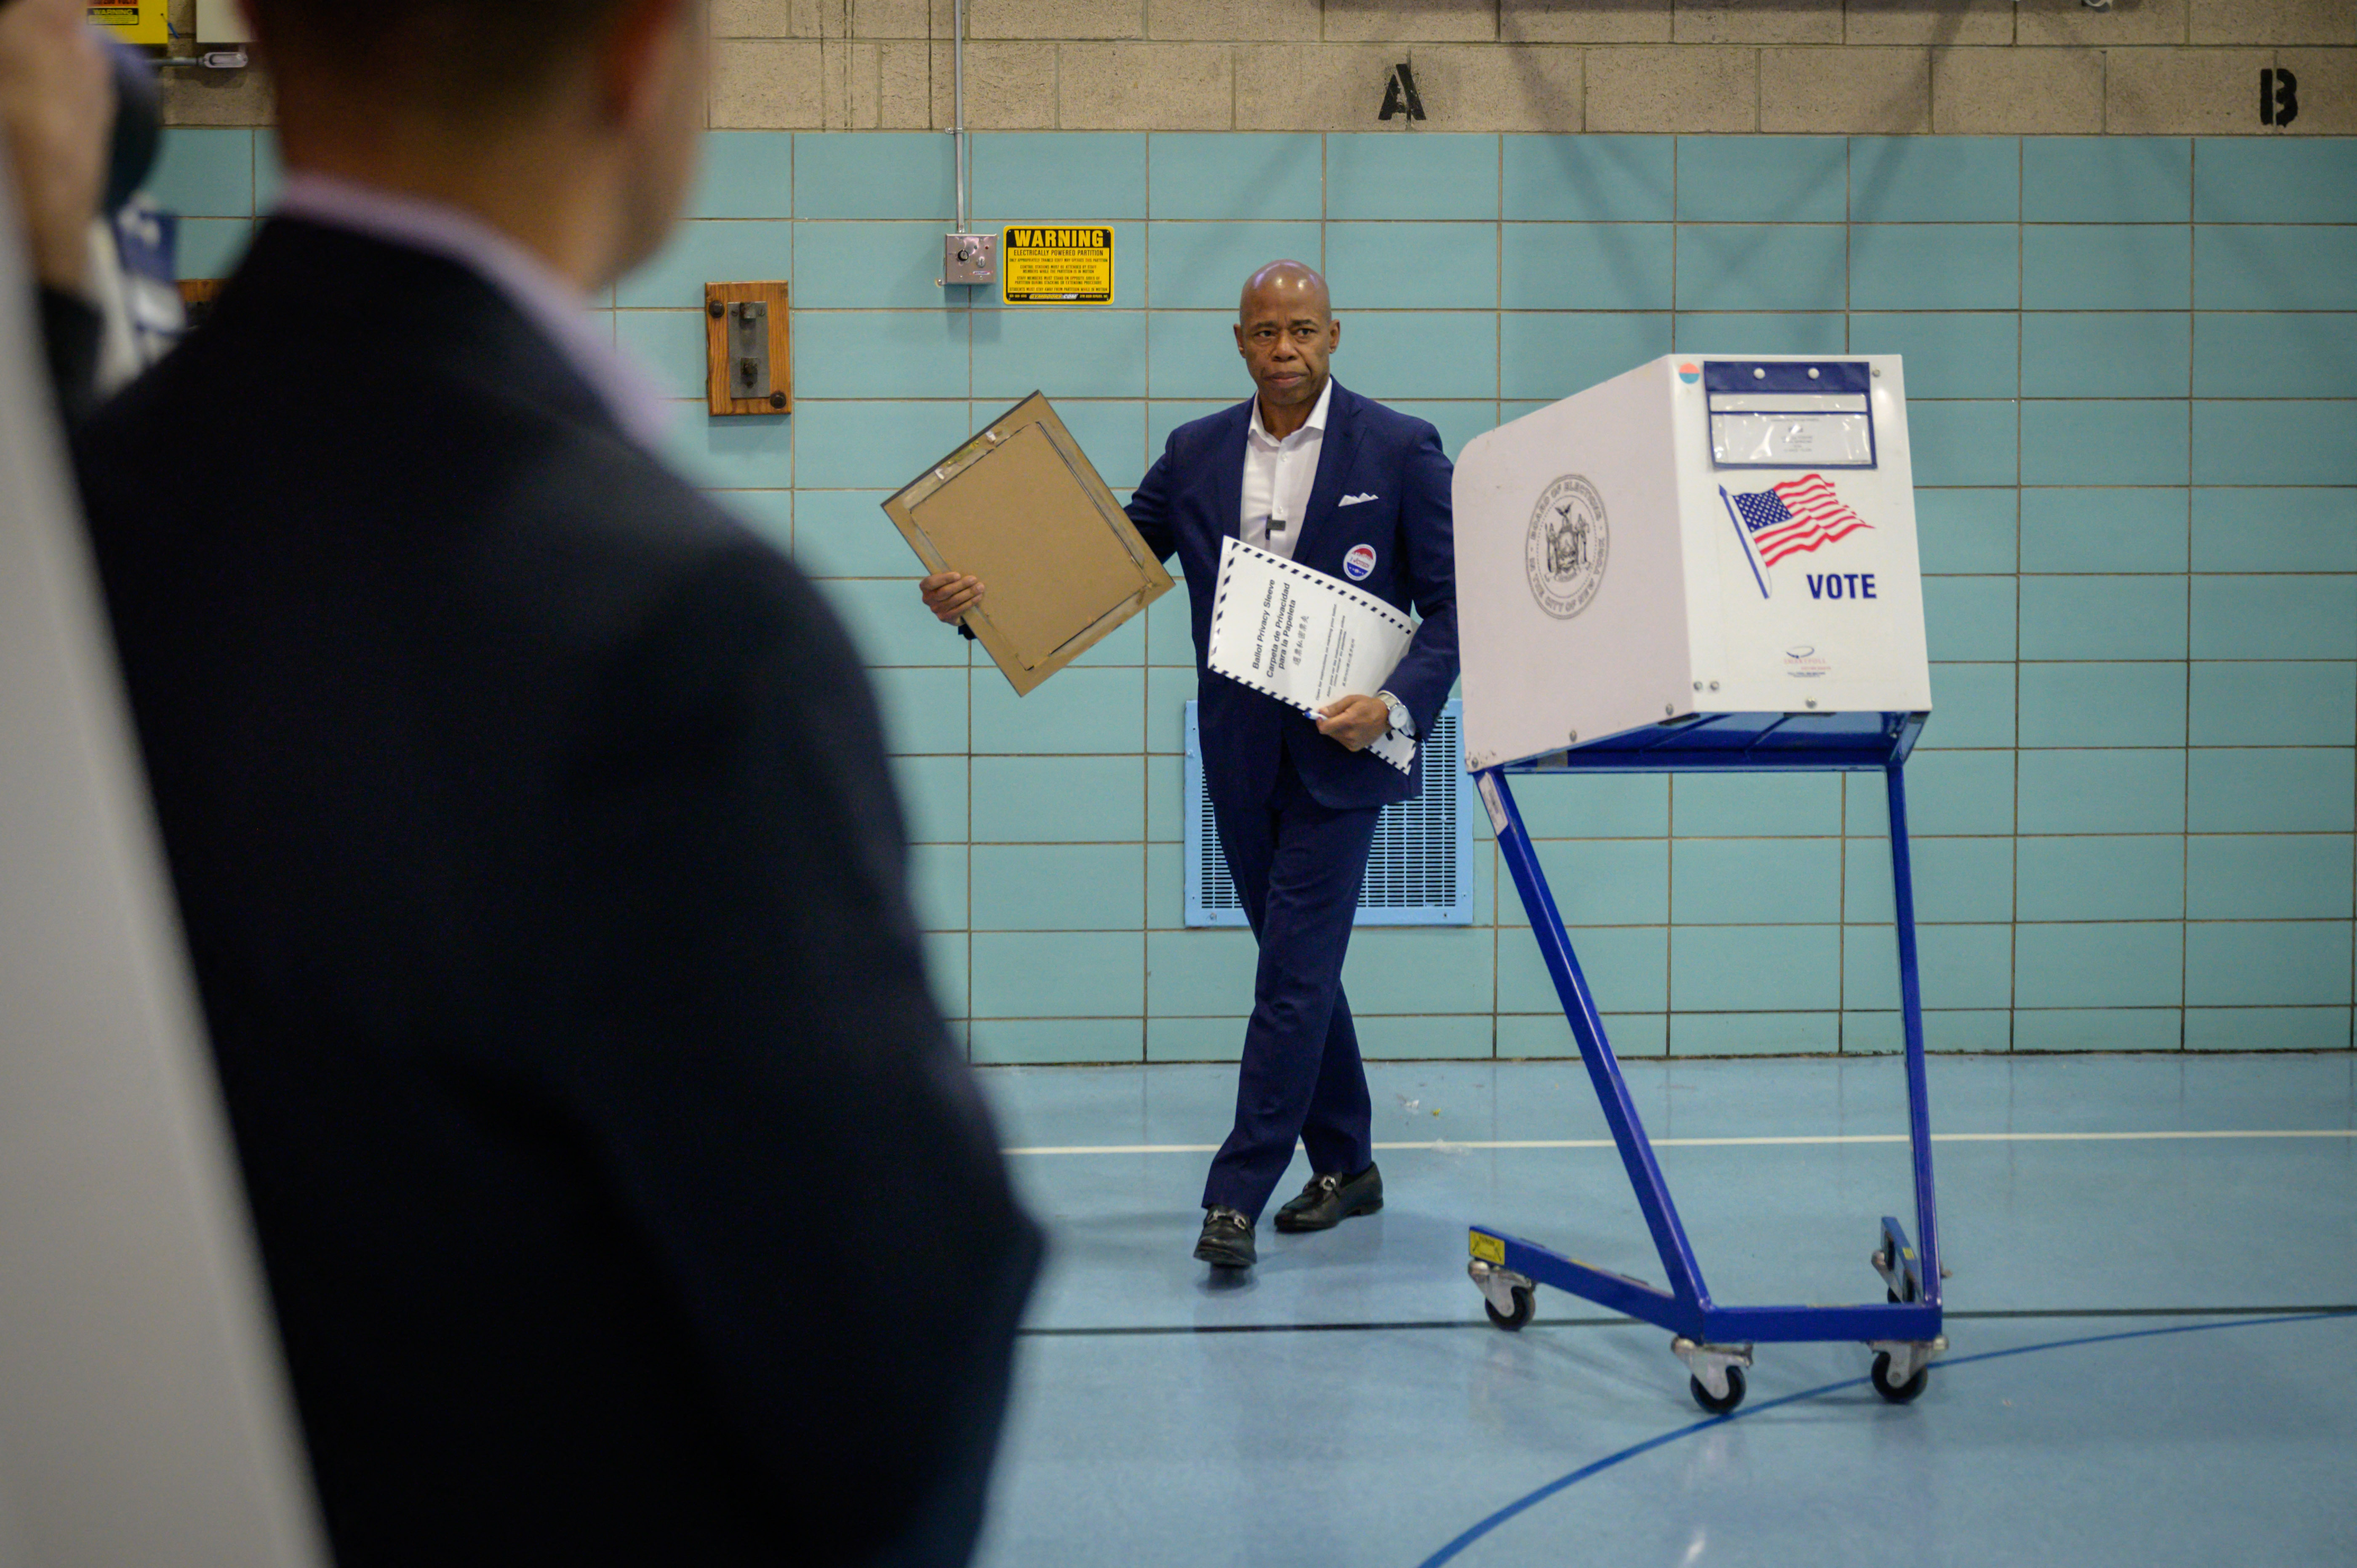 New York democratic mayoral candidate Eric Adams prepares to cast his vote at a voting center in Brooklyn, New York, on Tuesday, November 2.